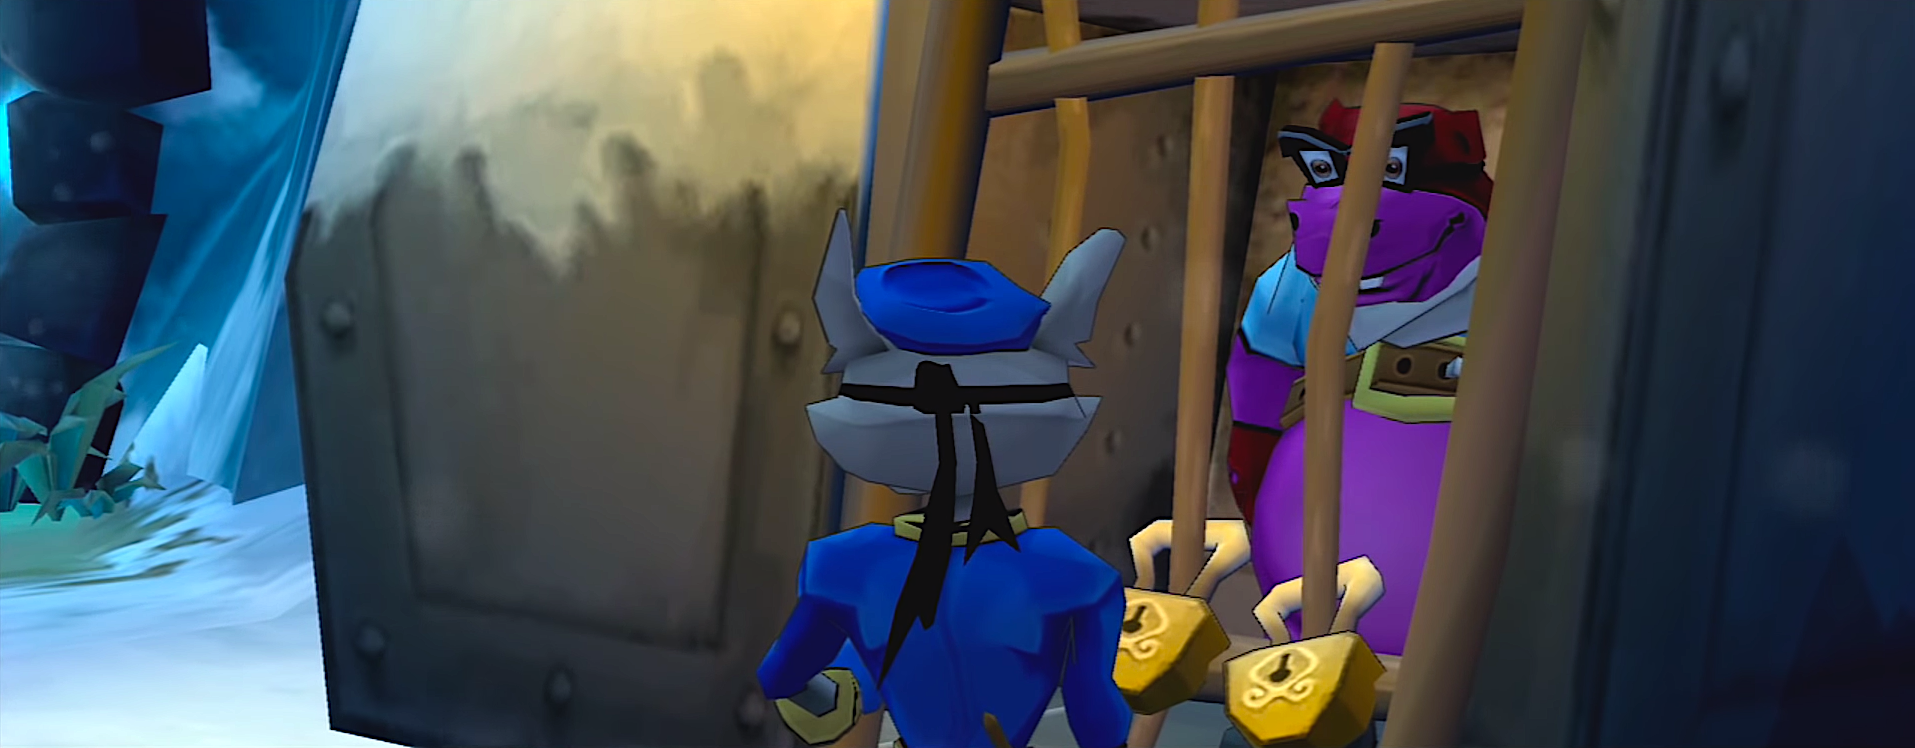 Review: Sly Cooper is such a steal it's criminal! - UNF Spinnaker